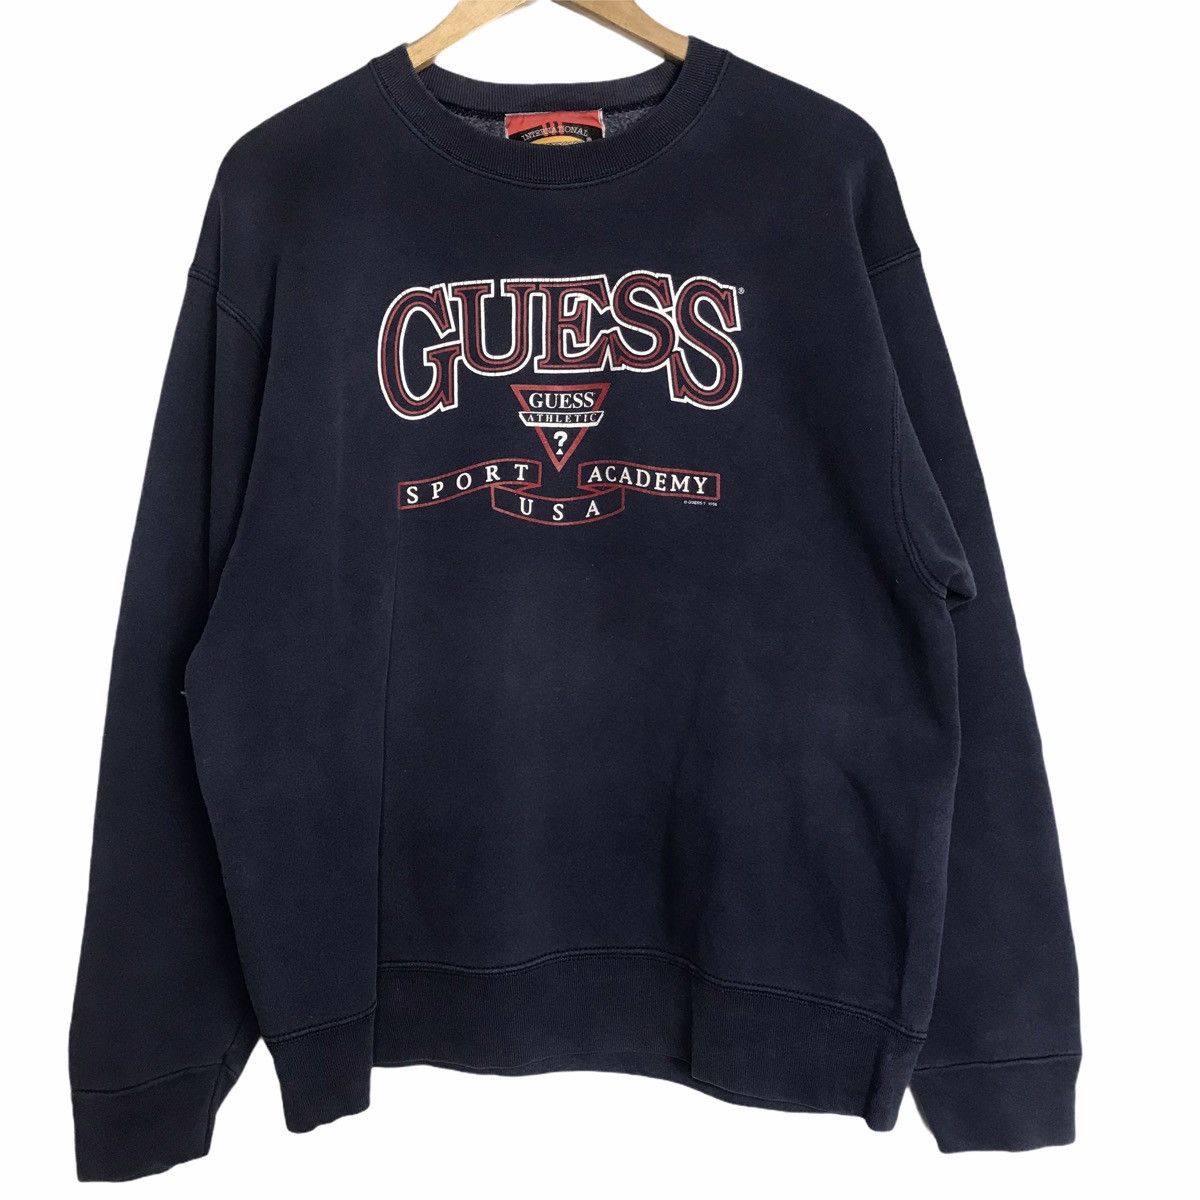 Vintage 1996 guess sweatshirt large size made in usa - 1